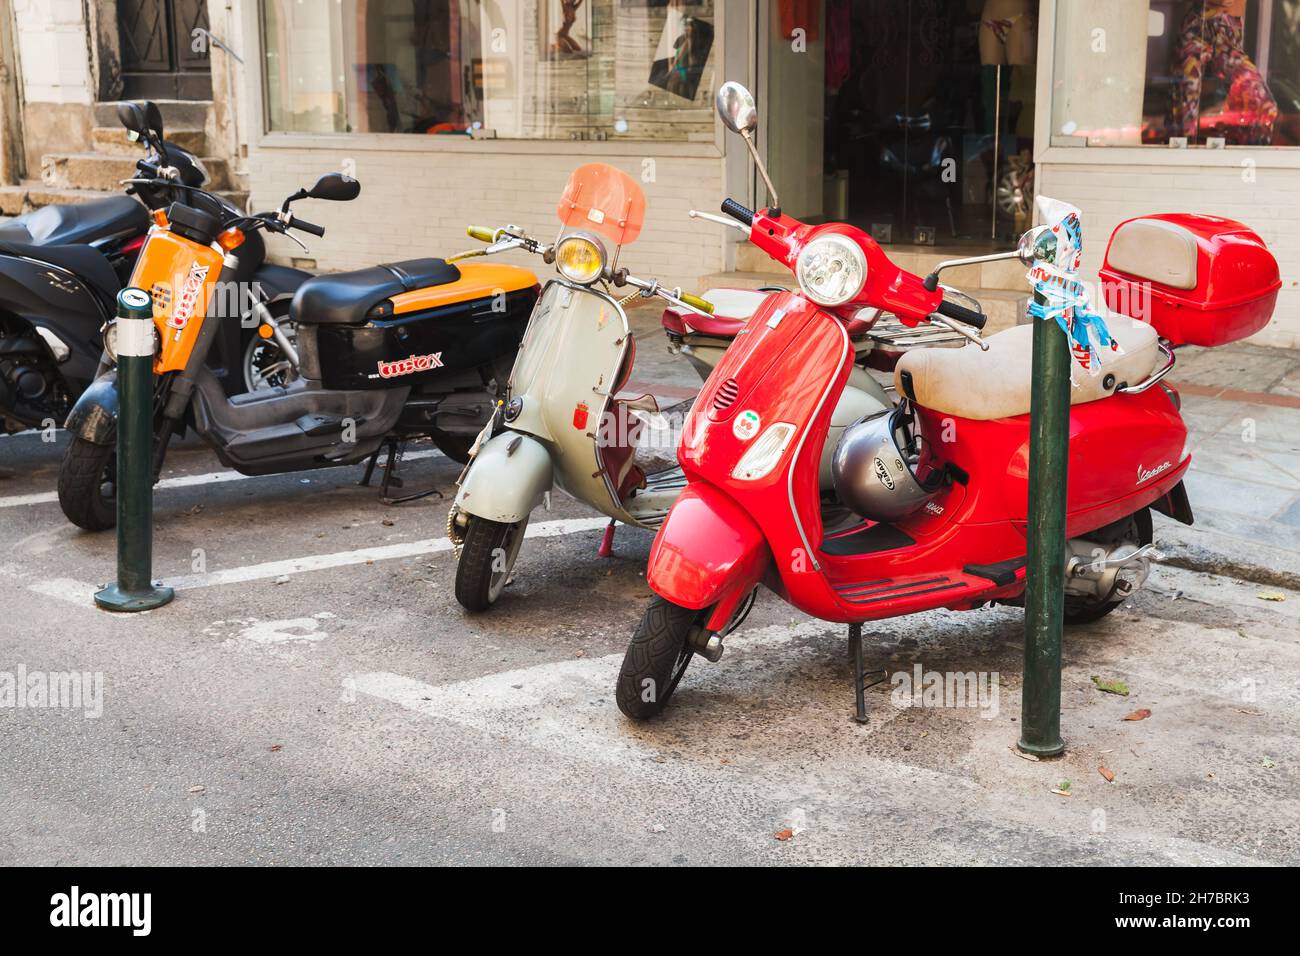 Genova, Italy - August 17, 2018: Classic Italian scooters stands parked on a roadside Stock Photo